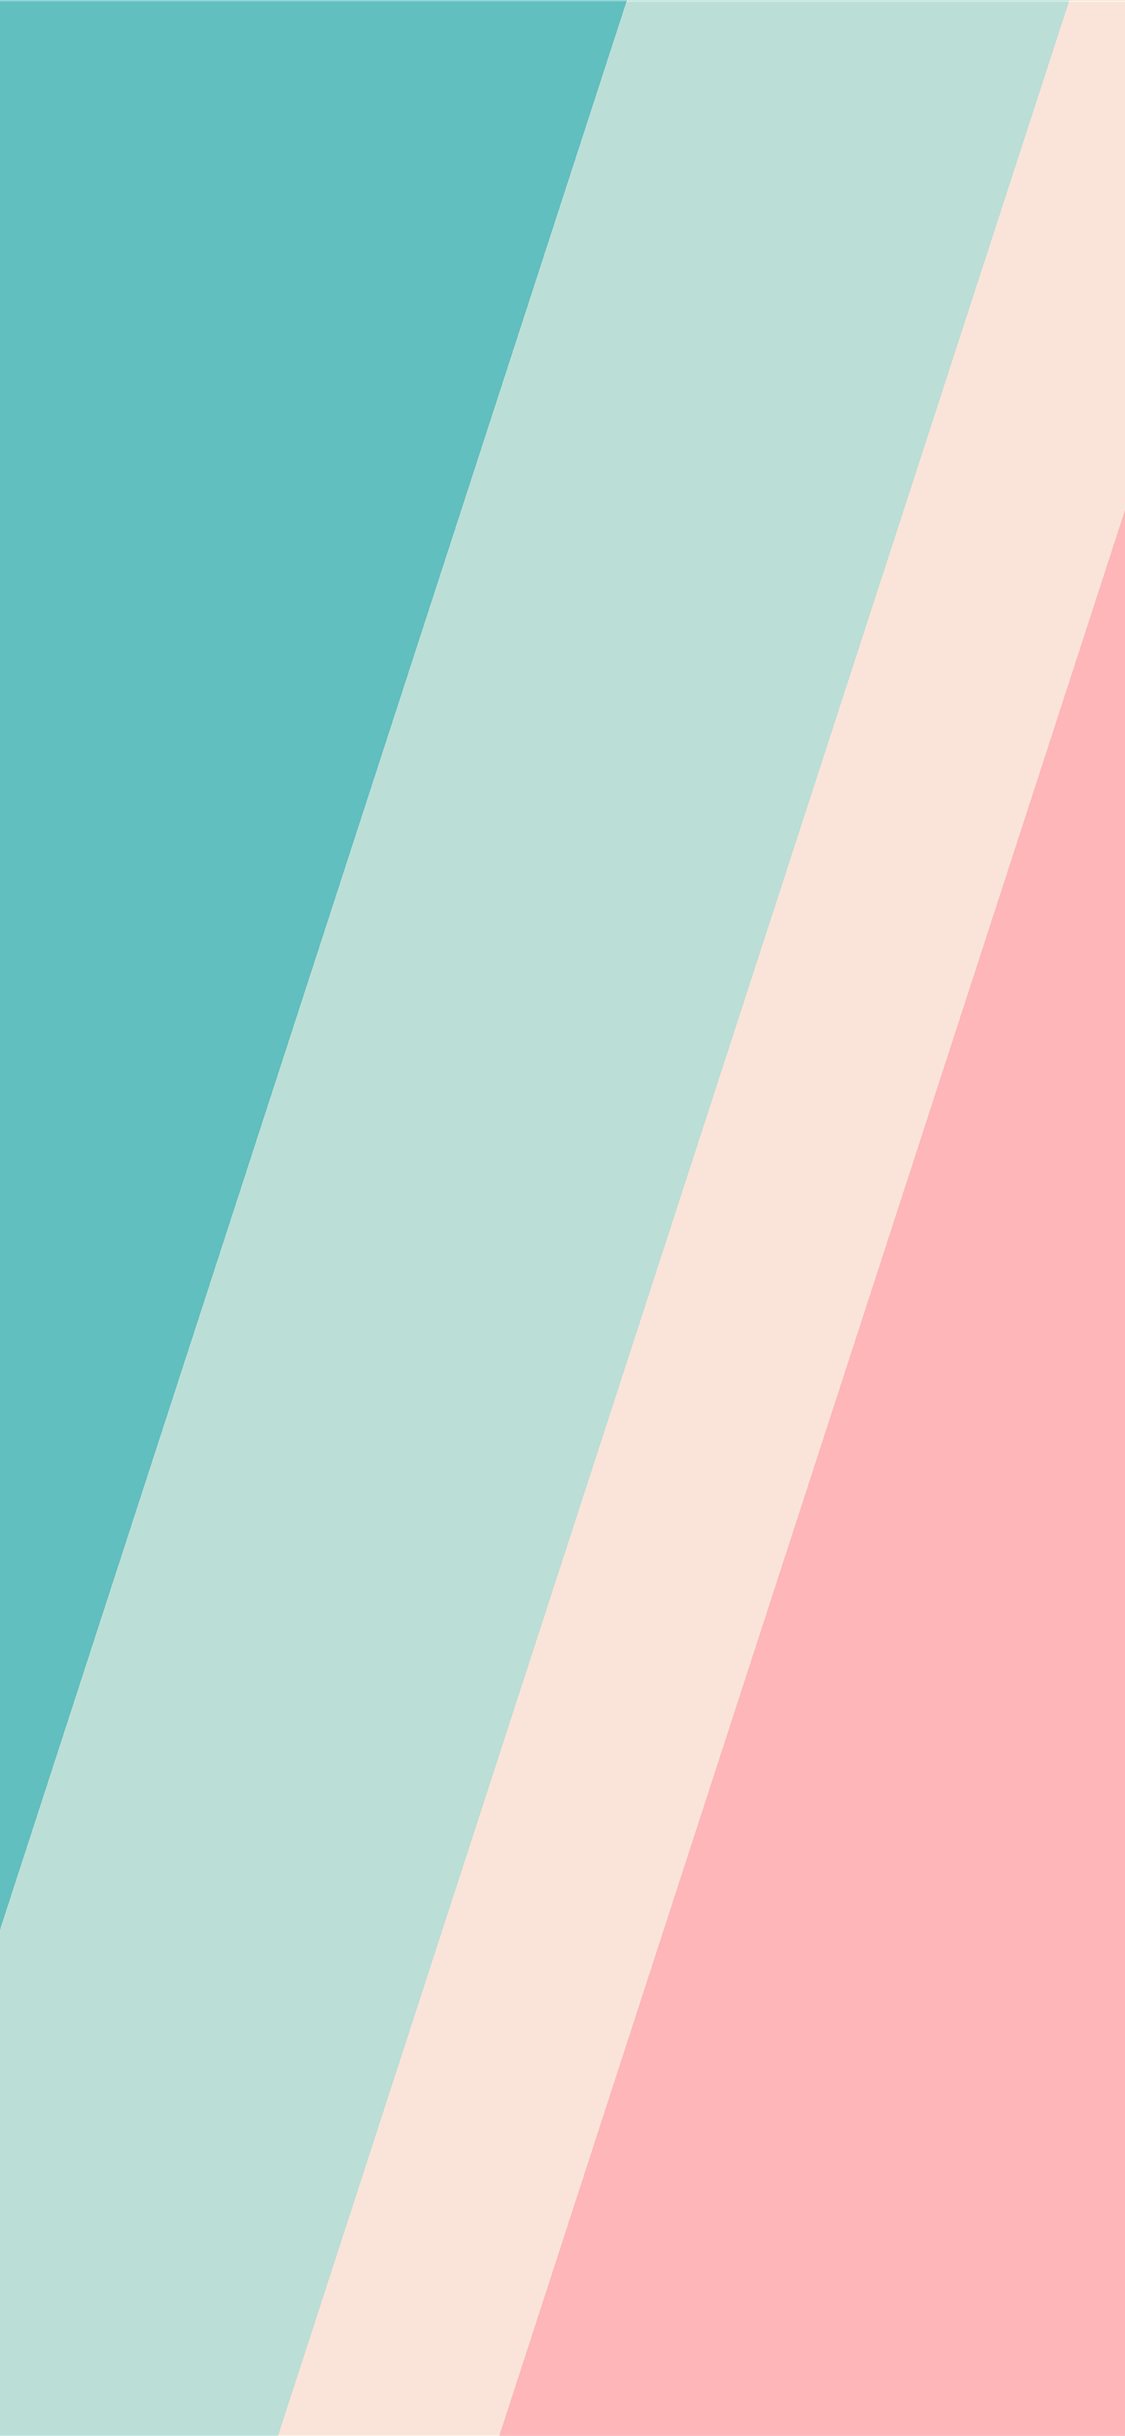 Teal And Pink Wallpapers  Wallpaper Cave